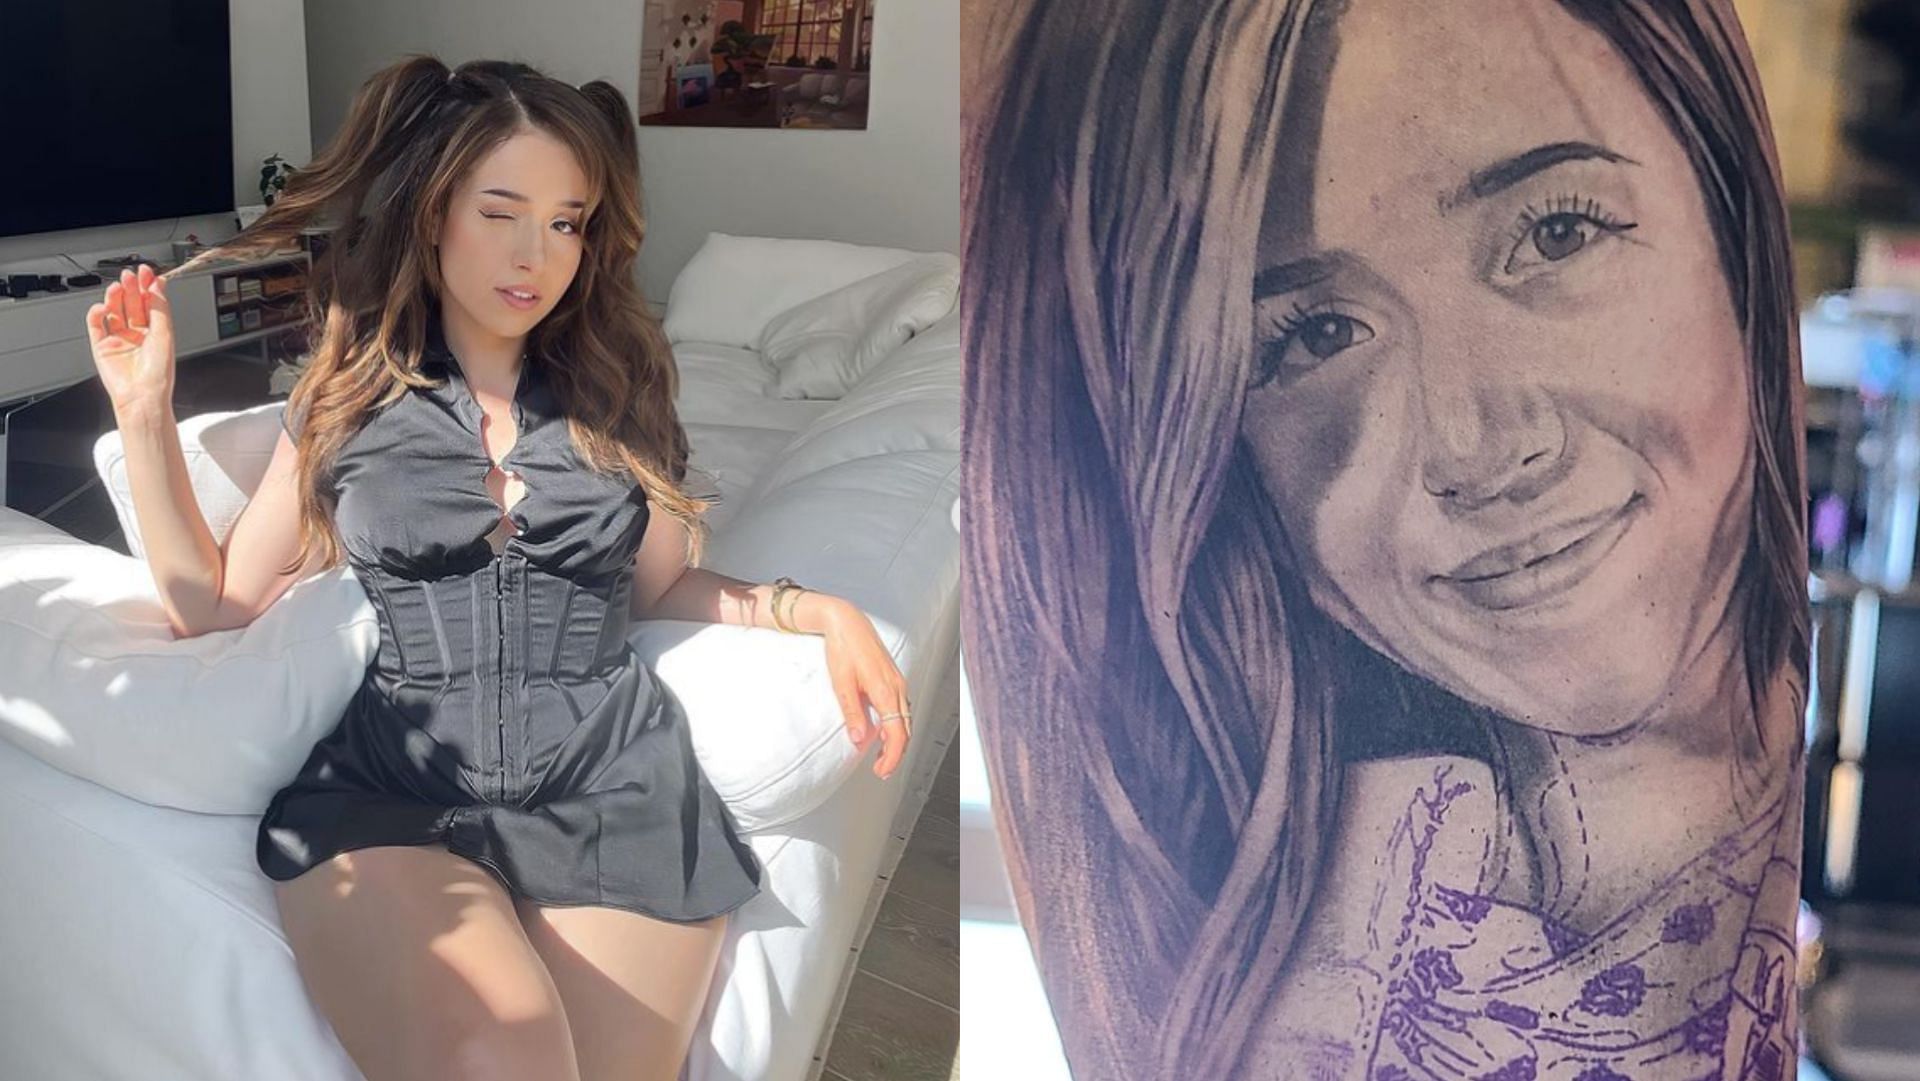 That was like poki with no hair  Pokimane fan gets brutally roasted after  getting a portrait tattoo of the streamer